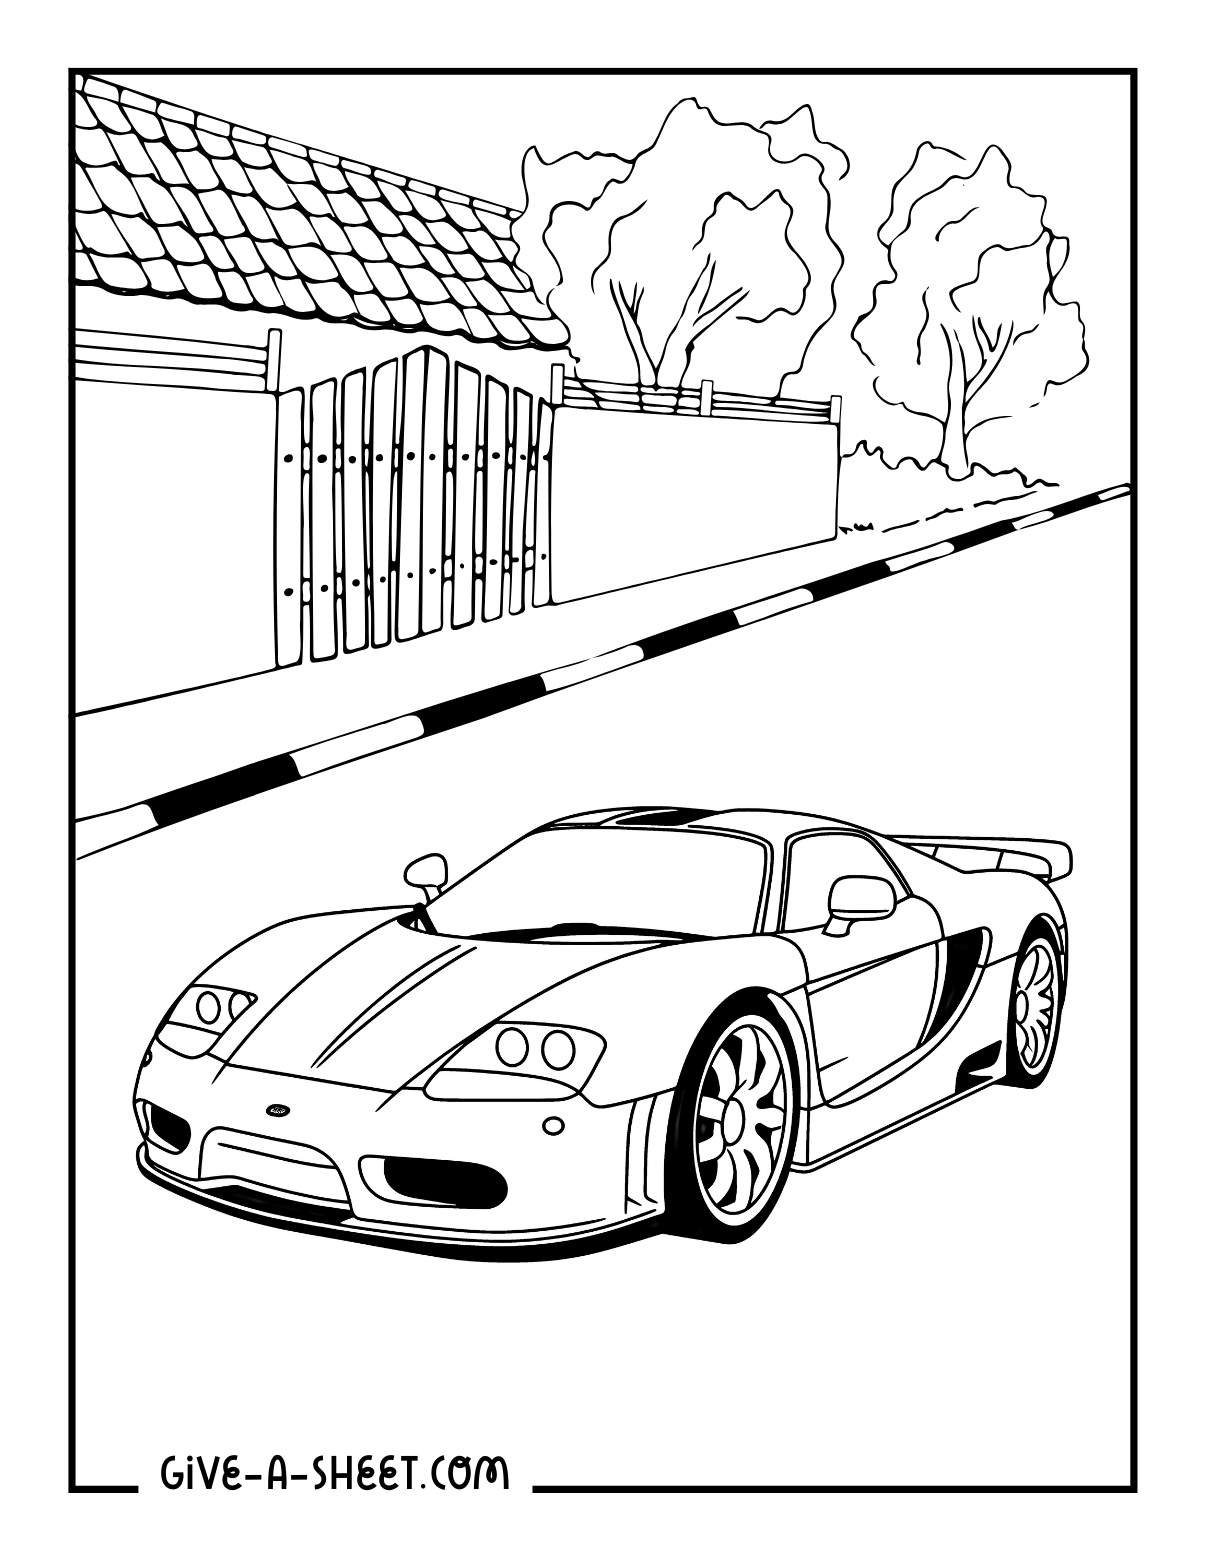 World of racing car coloring page on the curbside.